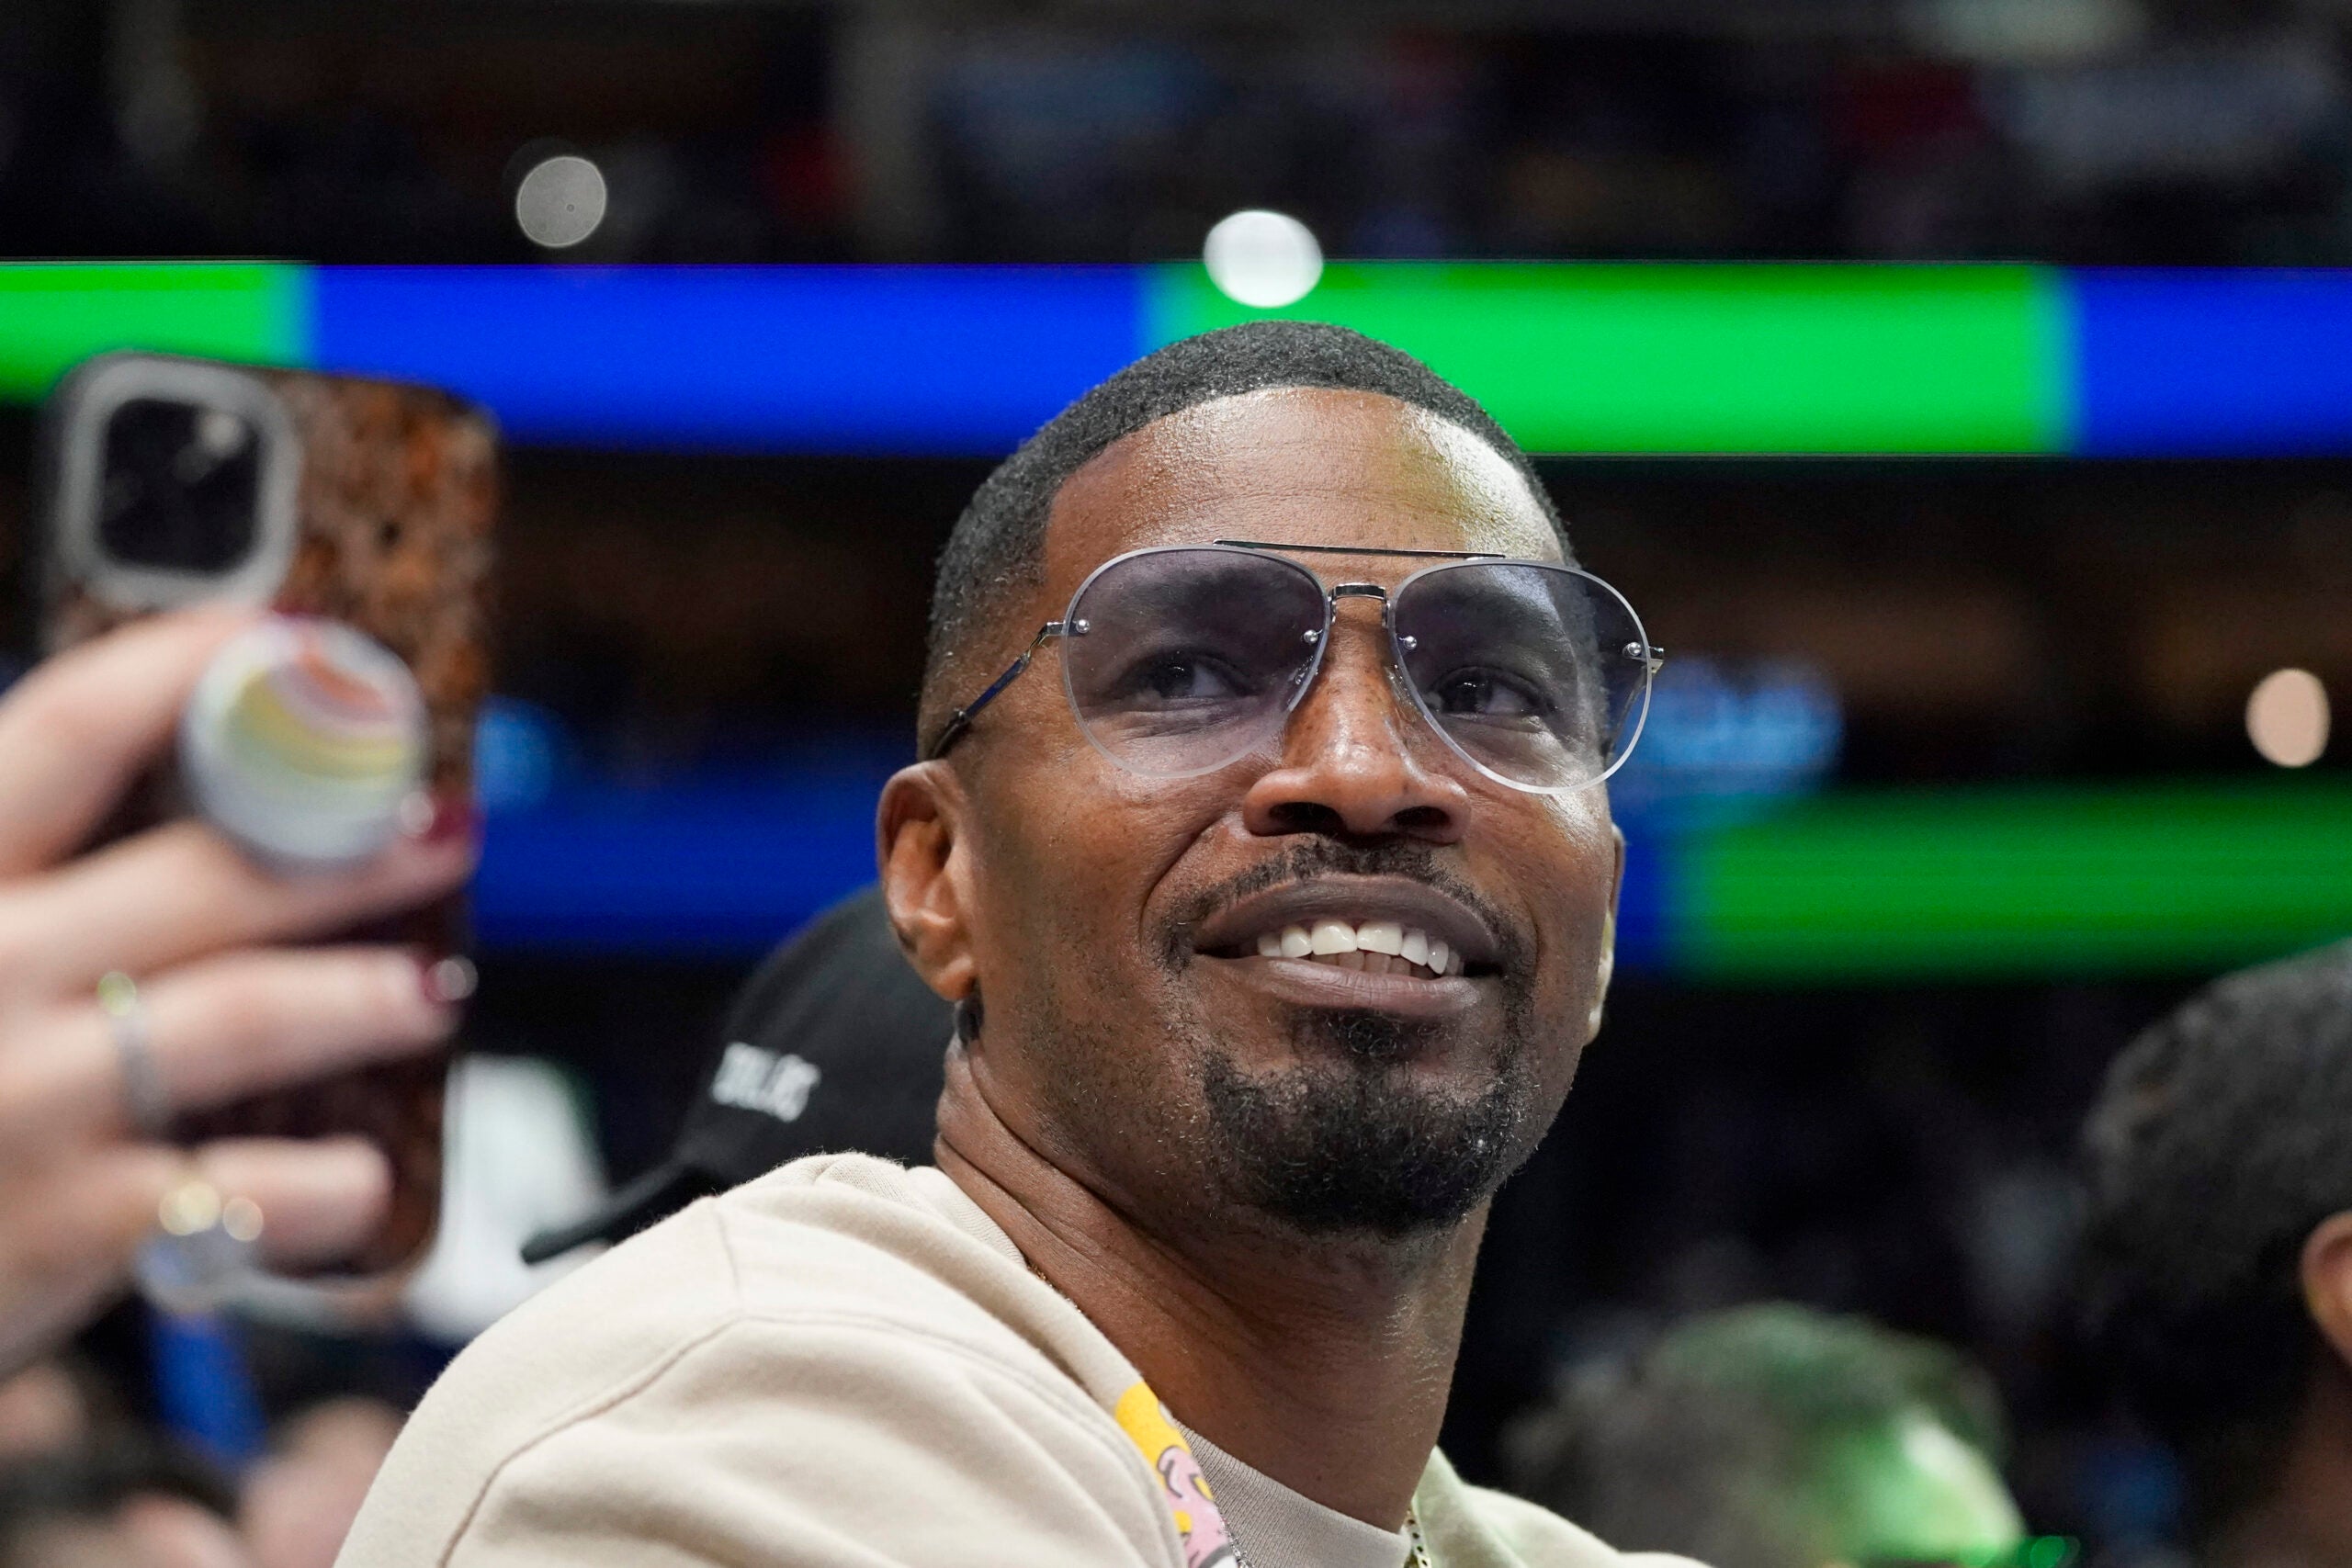 Jamie Foxx tells fans in an Instagram message that he is recovering from an illness